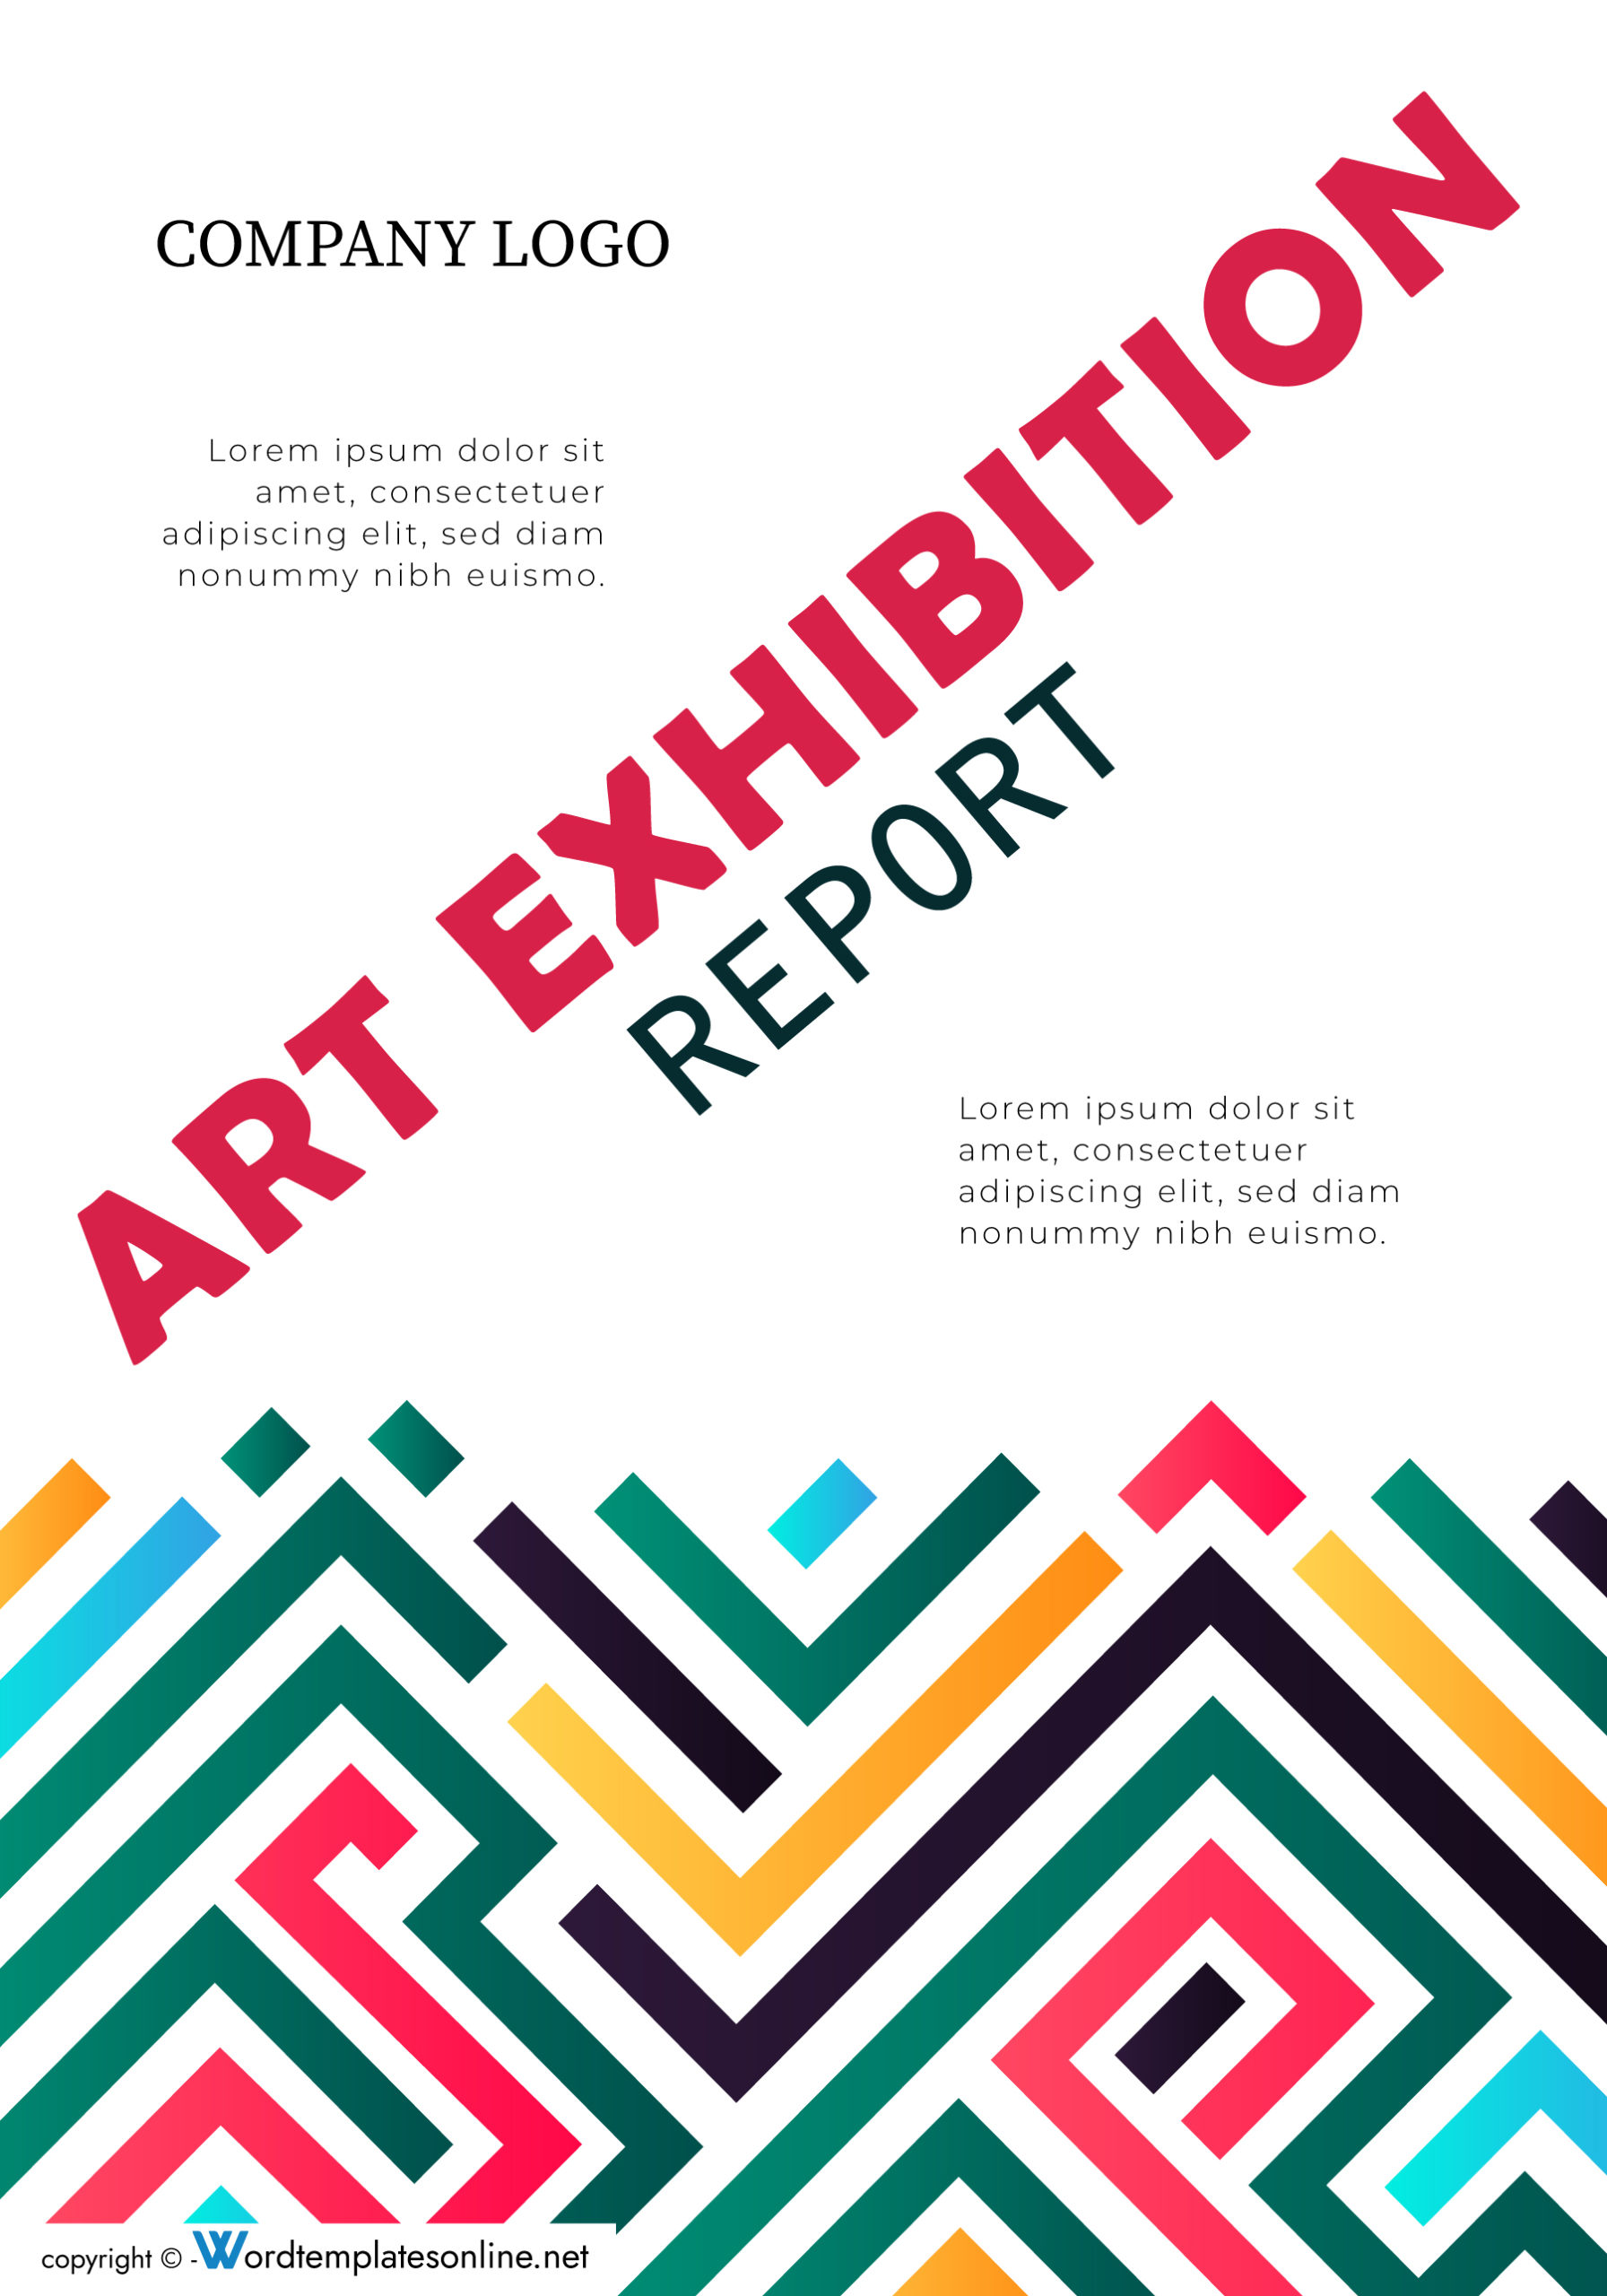 Stylish Art Exhibition Report Cover Page Design for Free Download